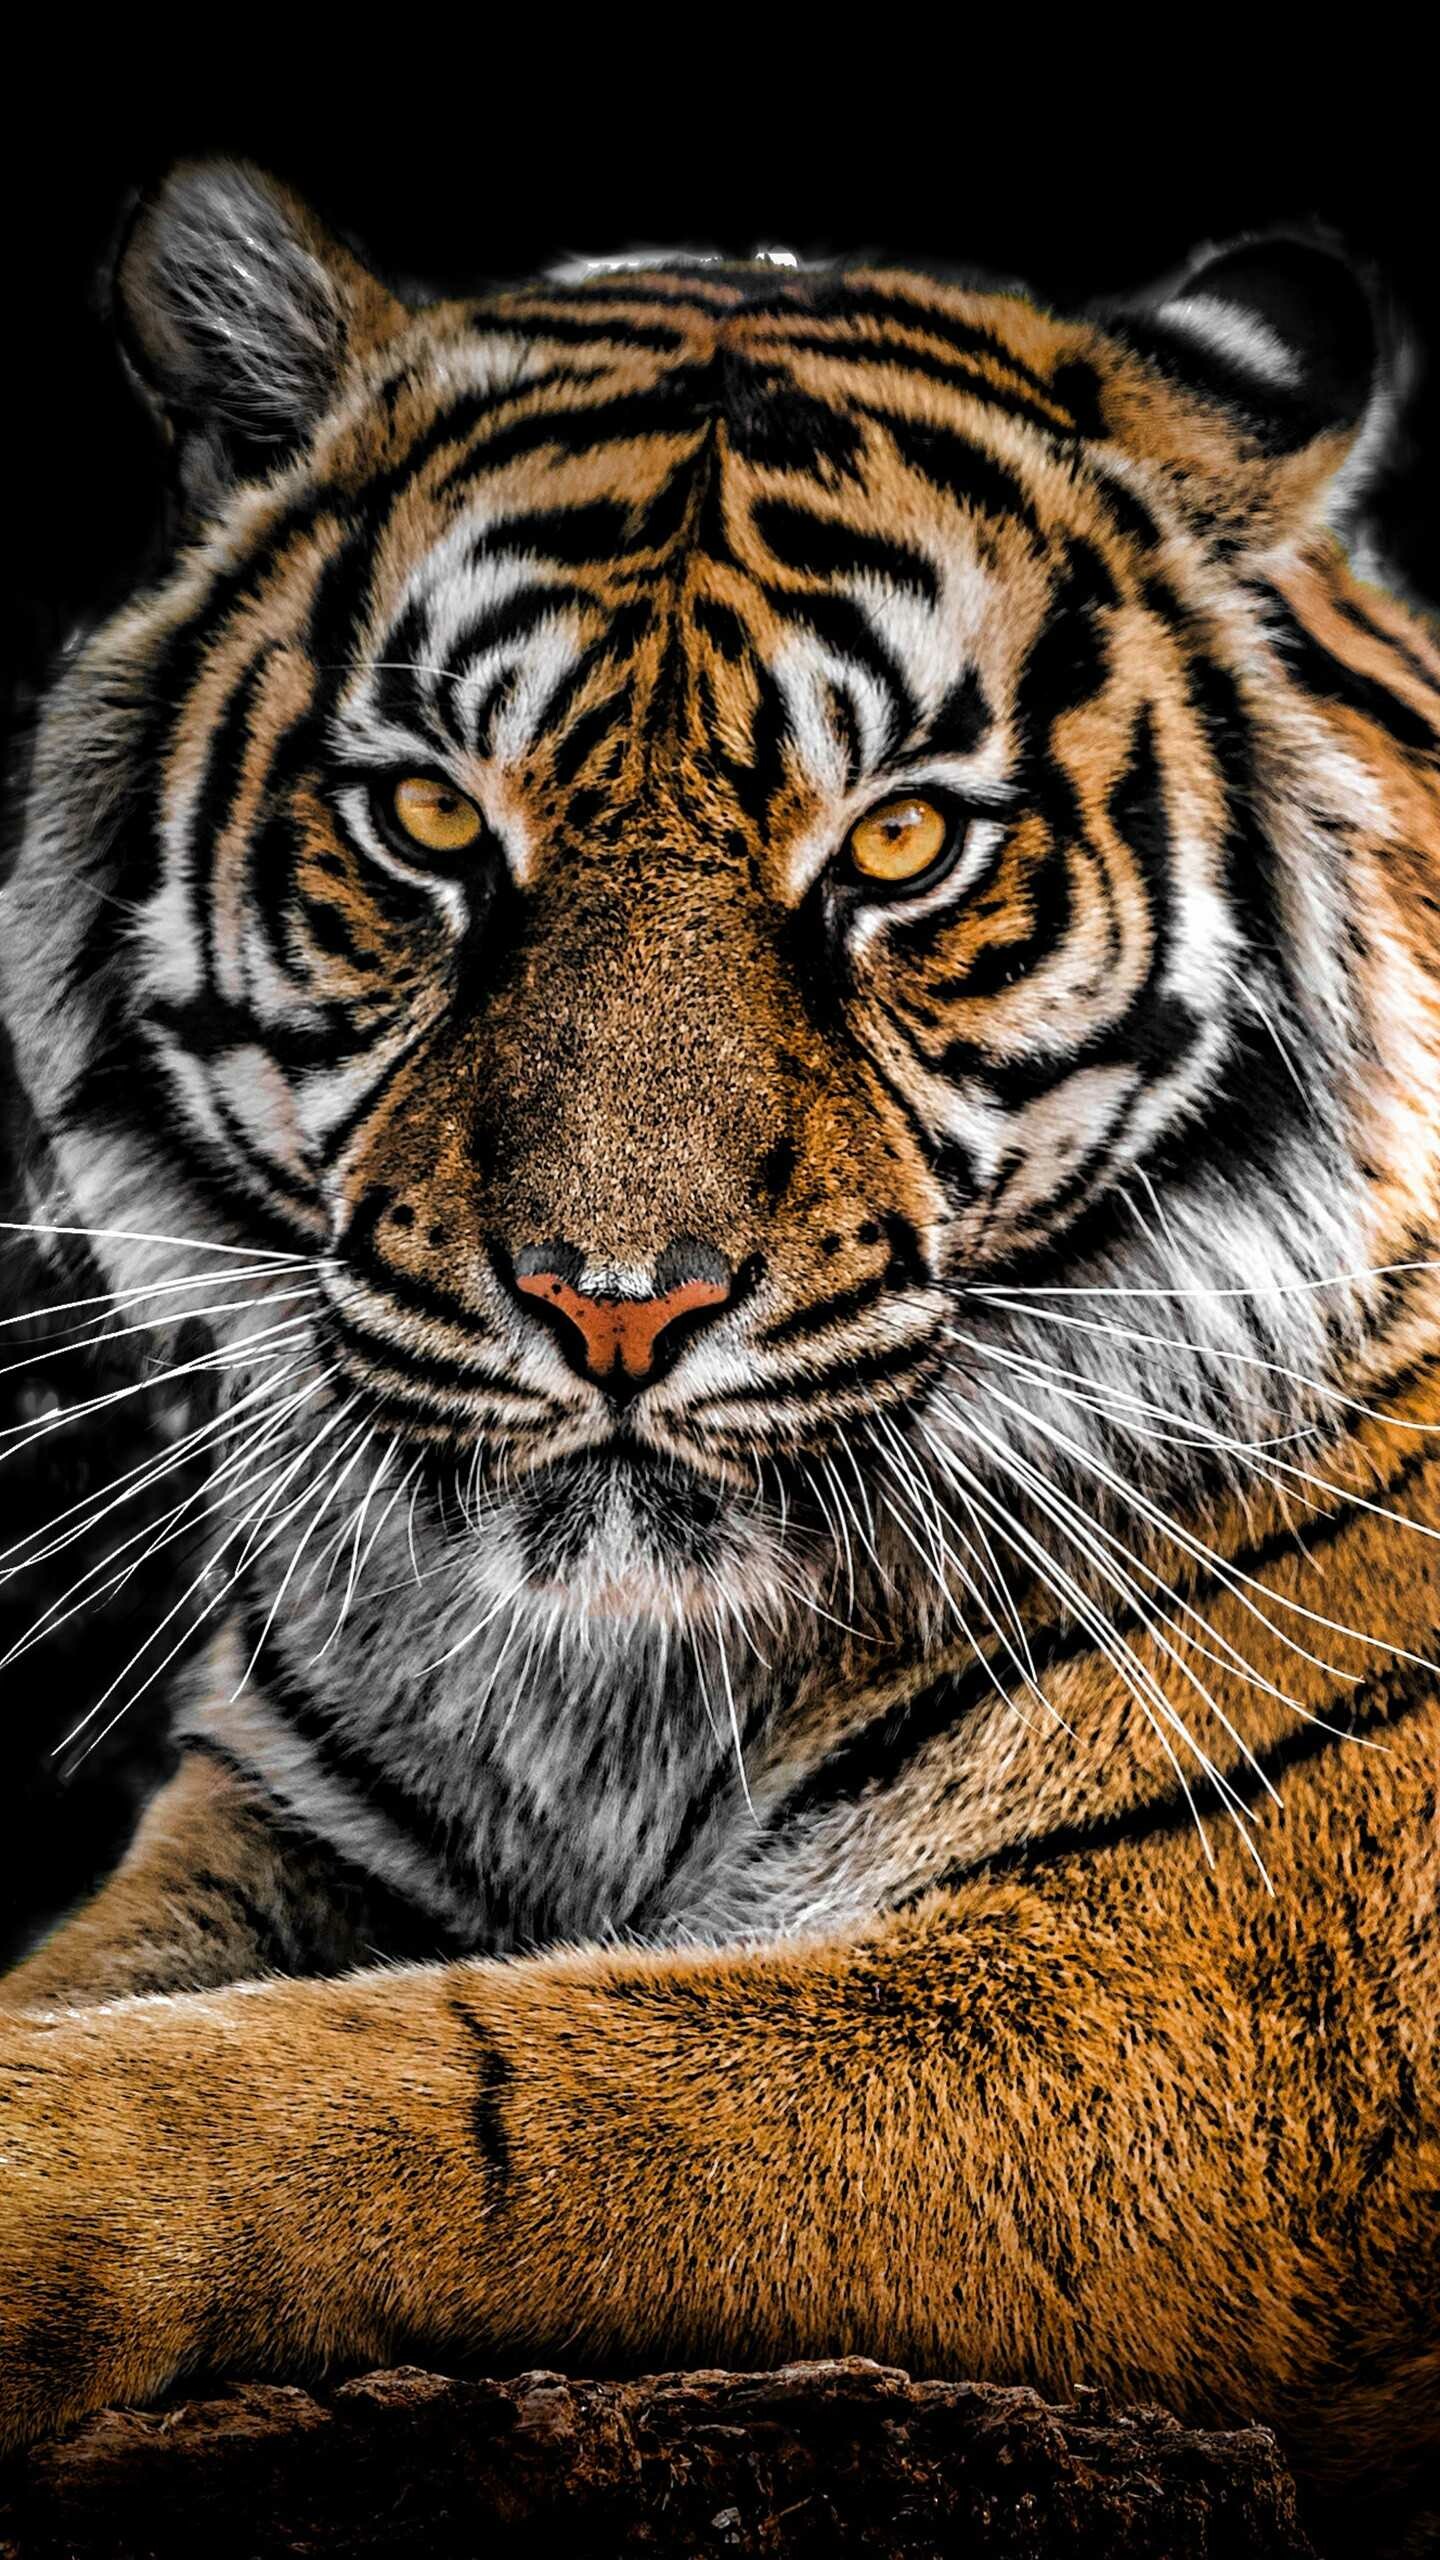 Tiger: Individual tigers have a large territory, and the size is determined mostly by the availability of prey. 1440x2560 HD Wallpaper.